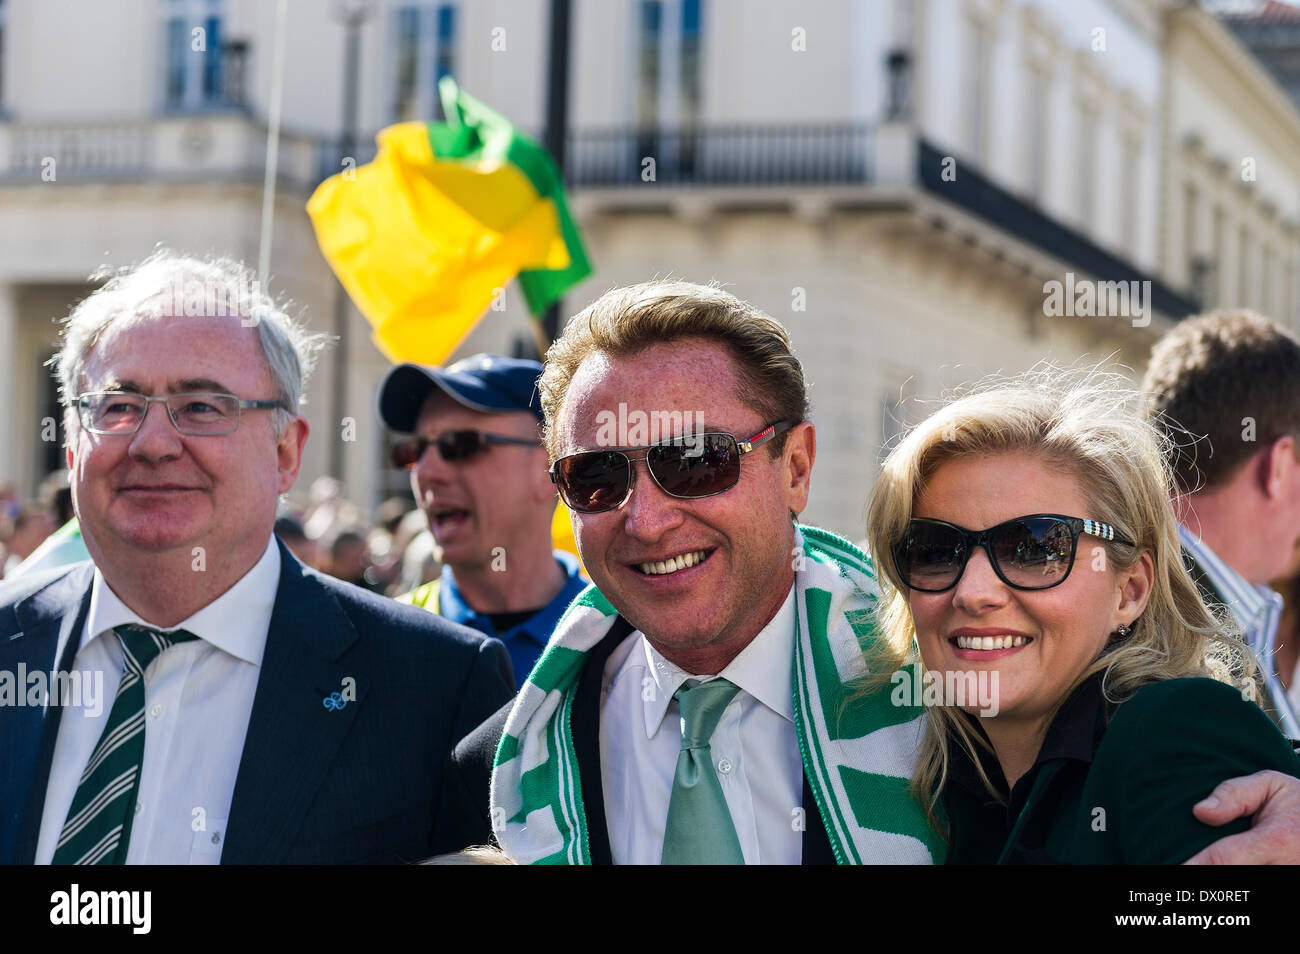 London, UK. 16 March 2014. Michael Flatley and his wife Niamh lead the annual St Patrick's day parade in London.  Photographer:  Gordon Scammell/Alamy Live News Stock Photo